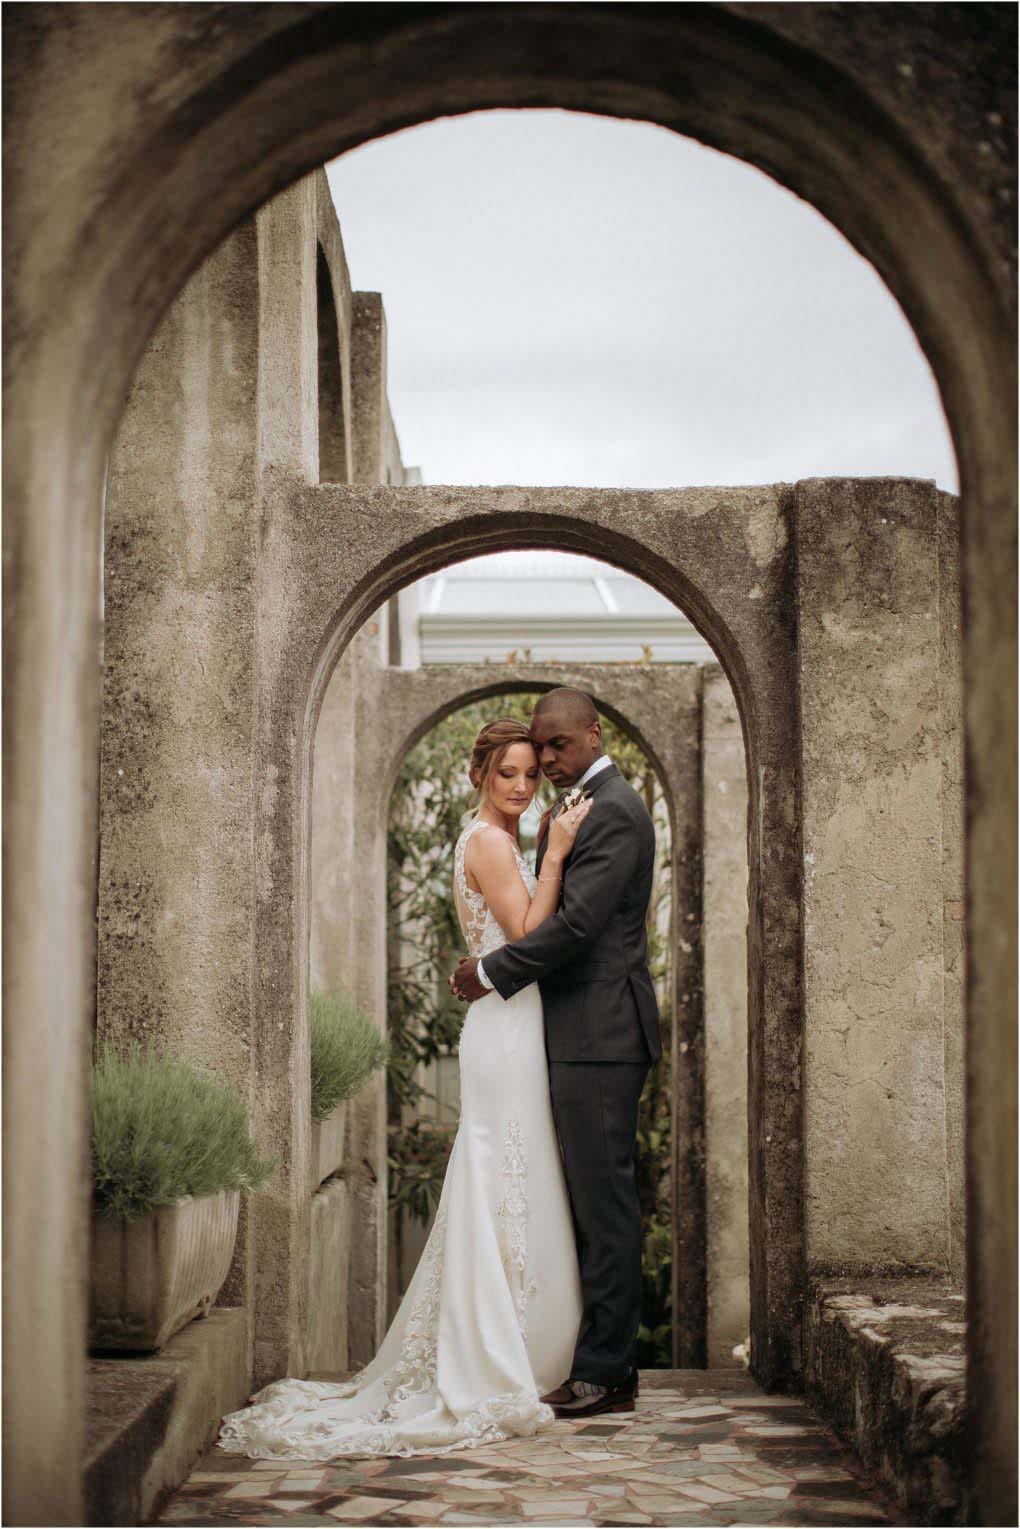 Bride and groom stand under an Italian archway, embracing.